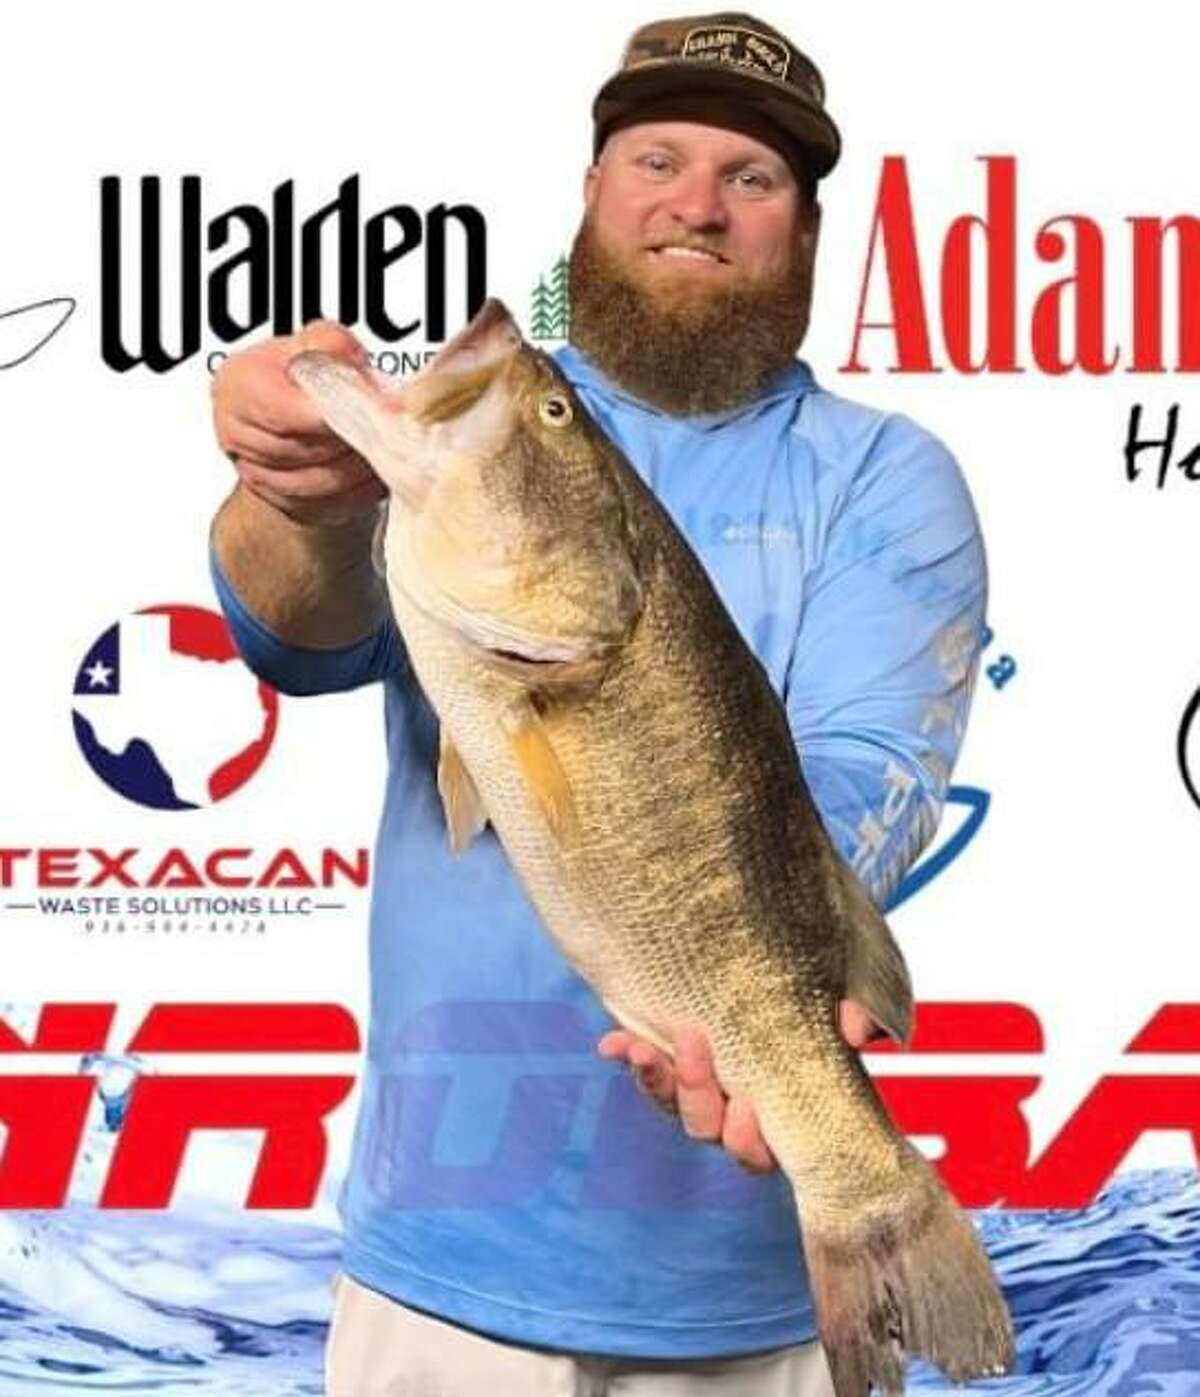 Brandon Sheridan came in first place in the CONROEBASS Thursday Big Bass Tournament with a bass weight of 7.13 pounds.